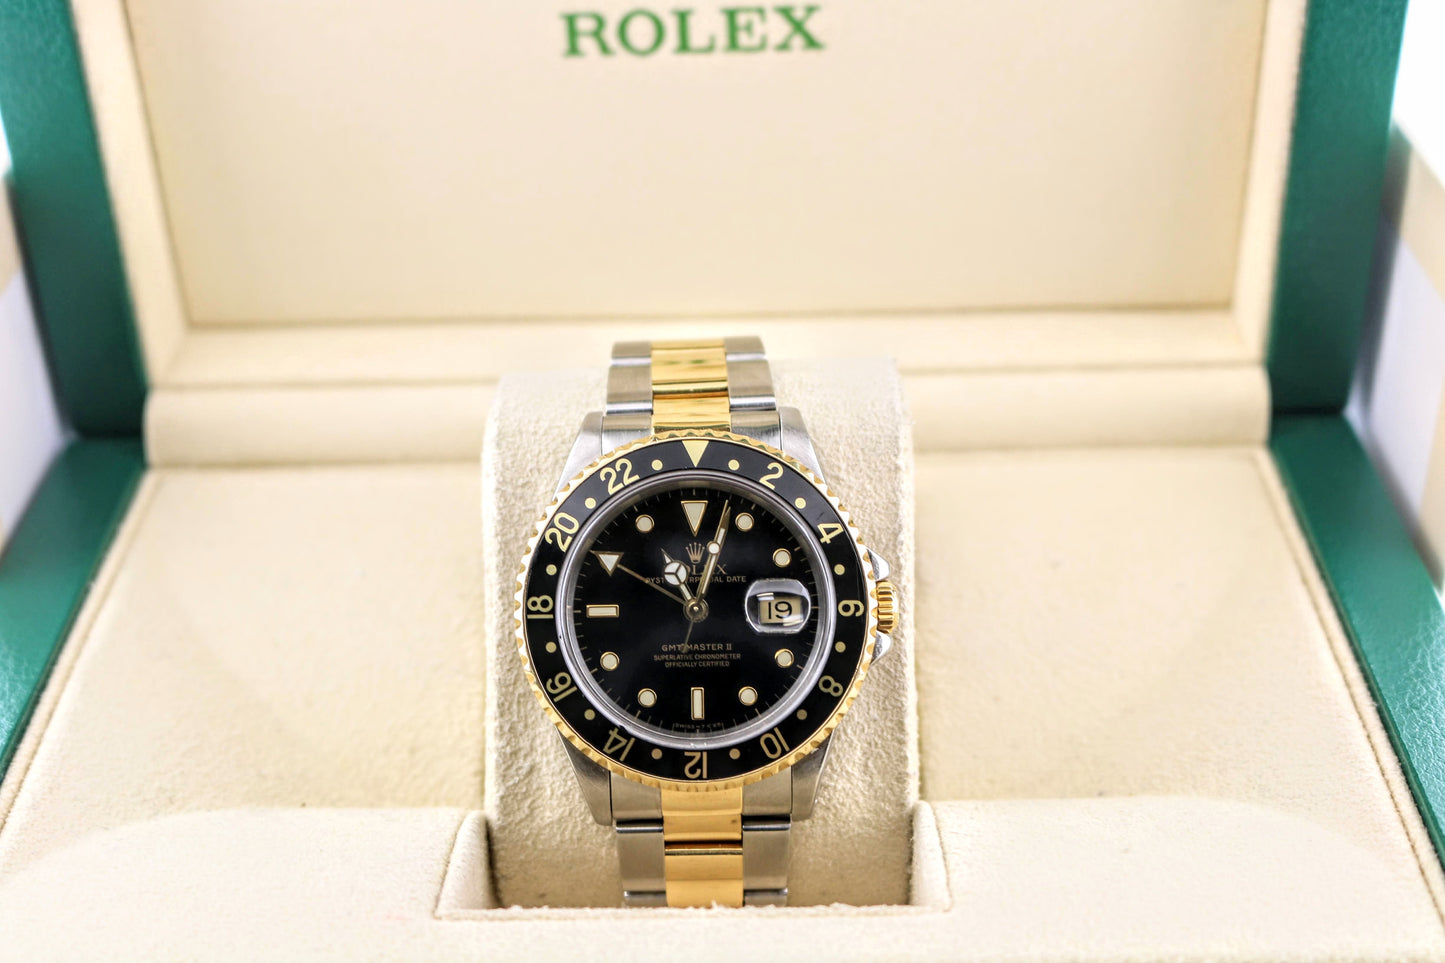 1991 Rolex GMT Master II 16713 Black Dial TT Oyster No Papers 40mm